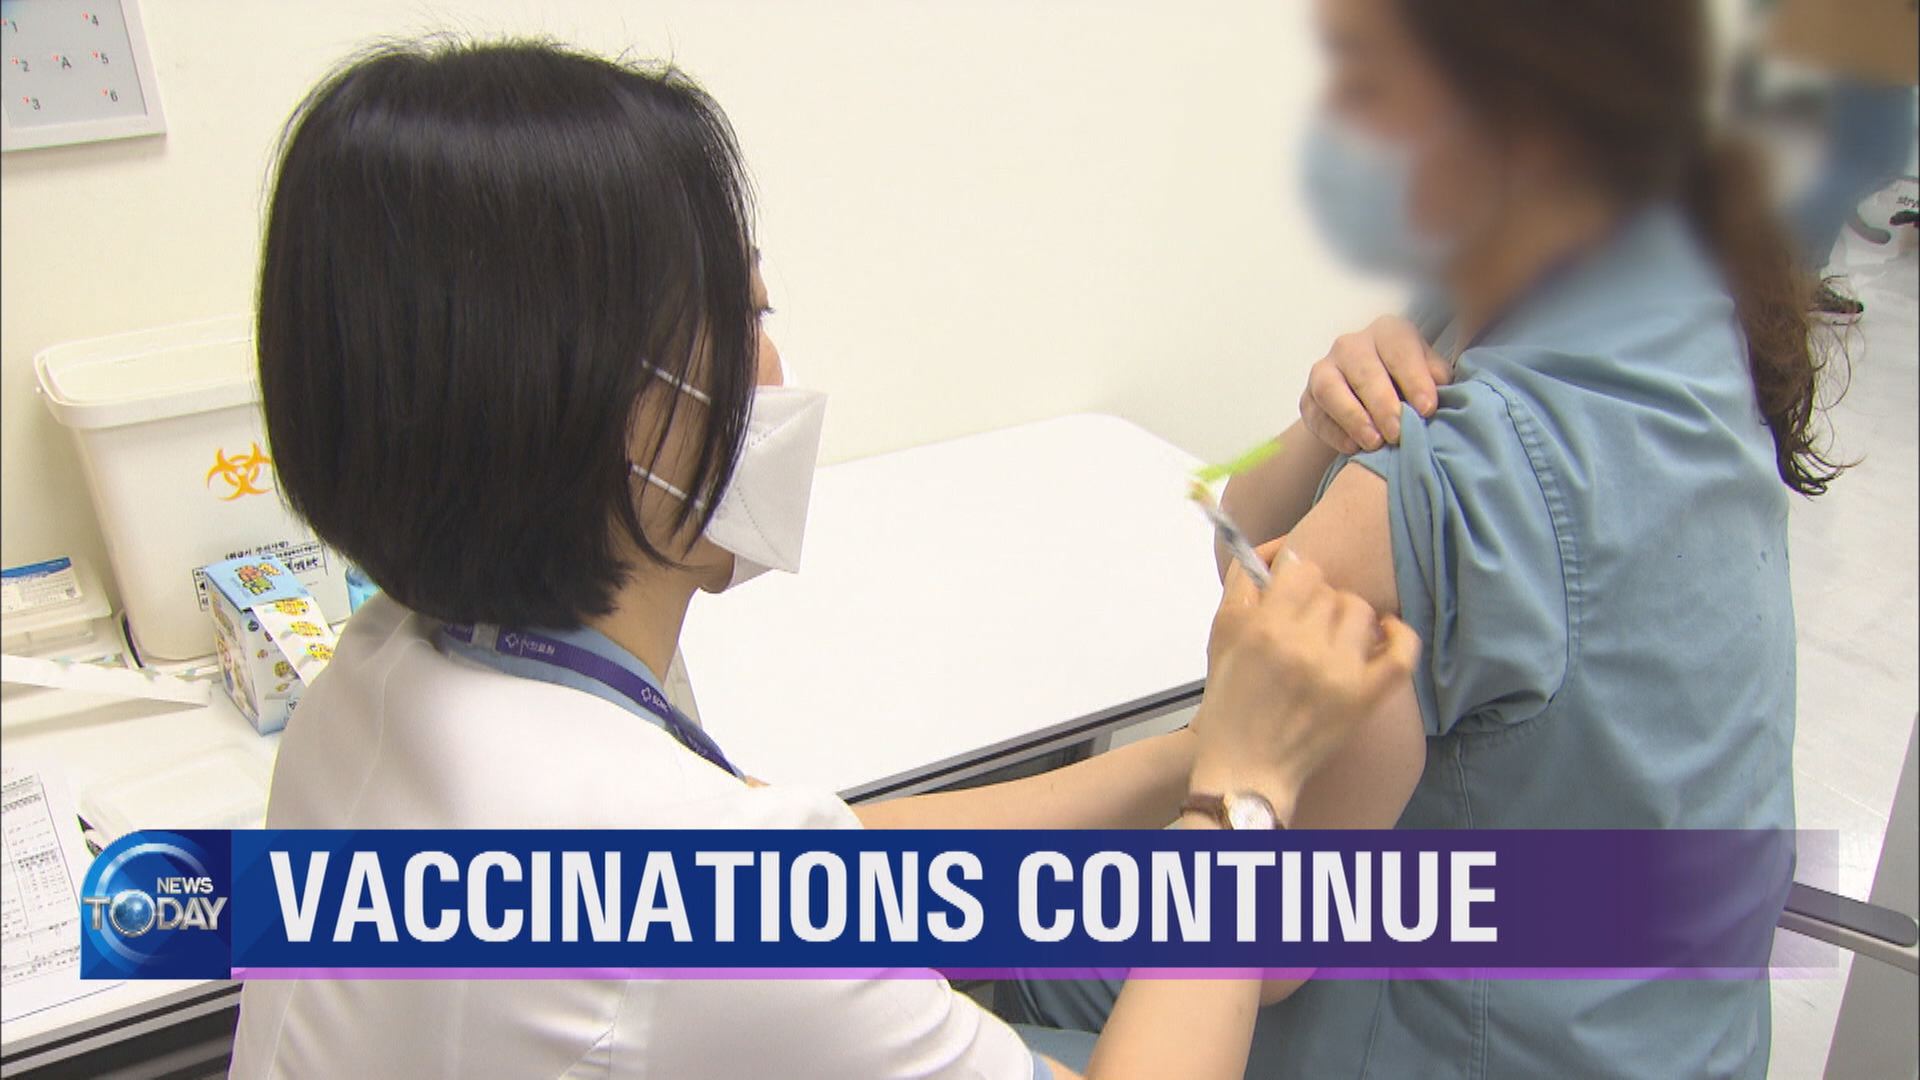 VACCINATIONS CONTINUE